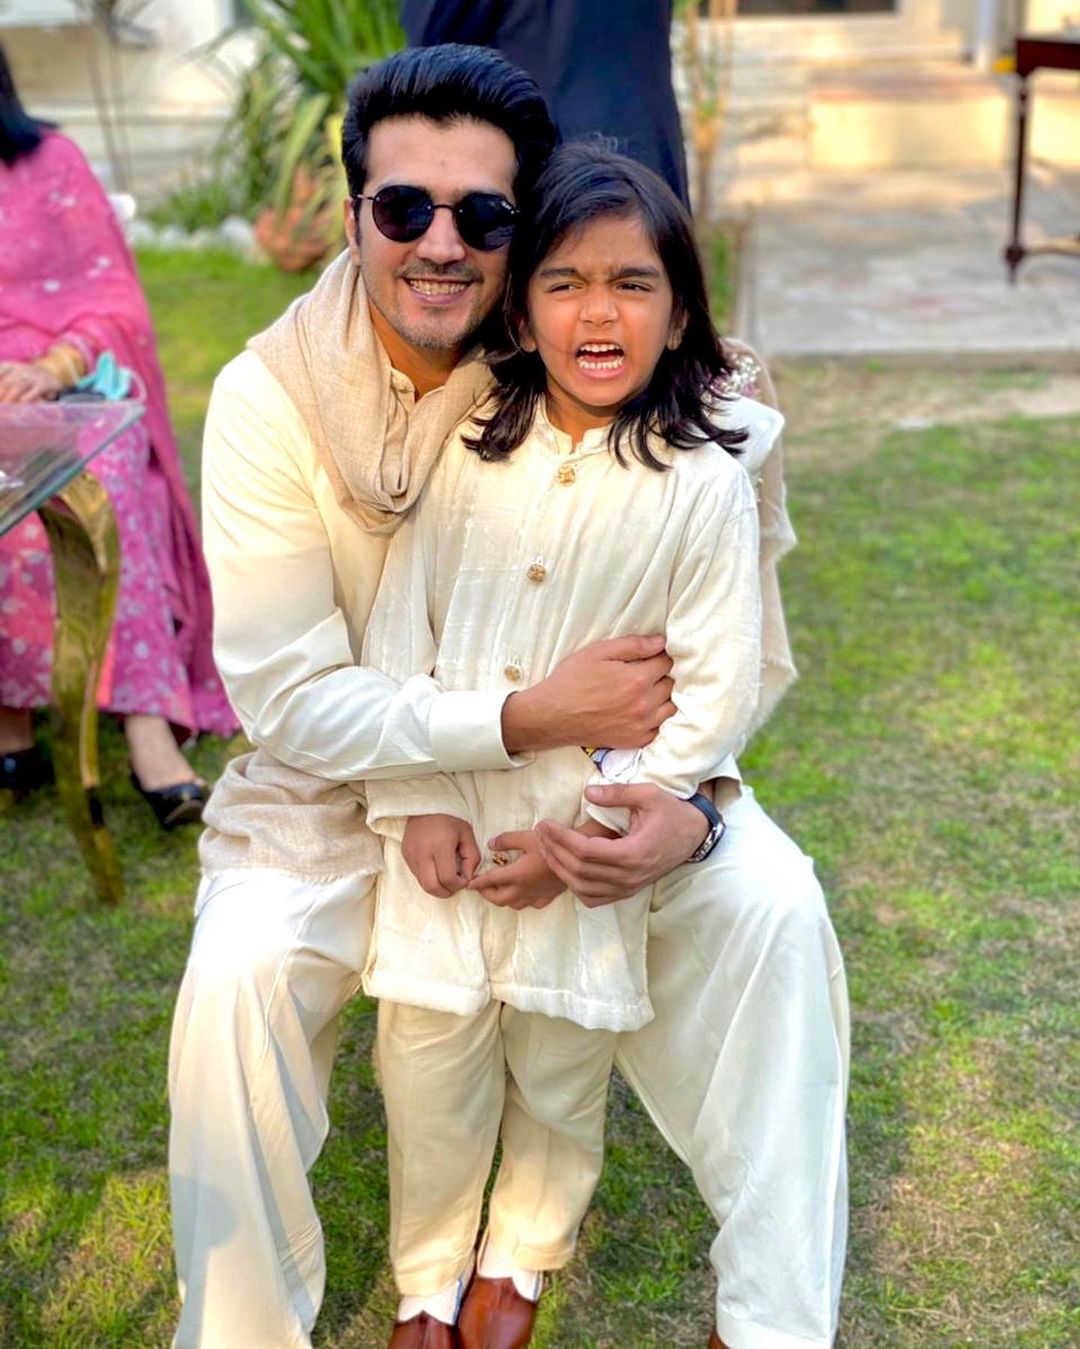 Actor Shahzad Sheikh with his Wife and Kids at a Recent Wedding